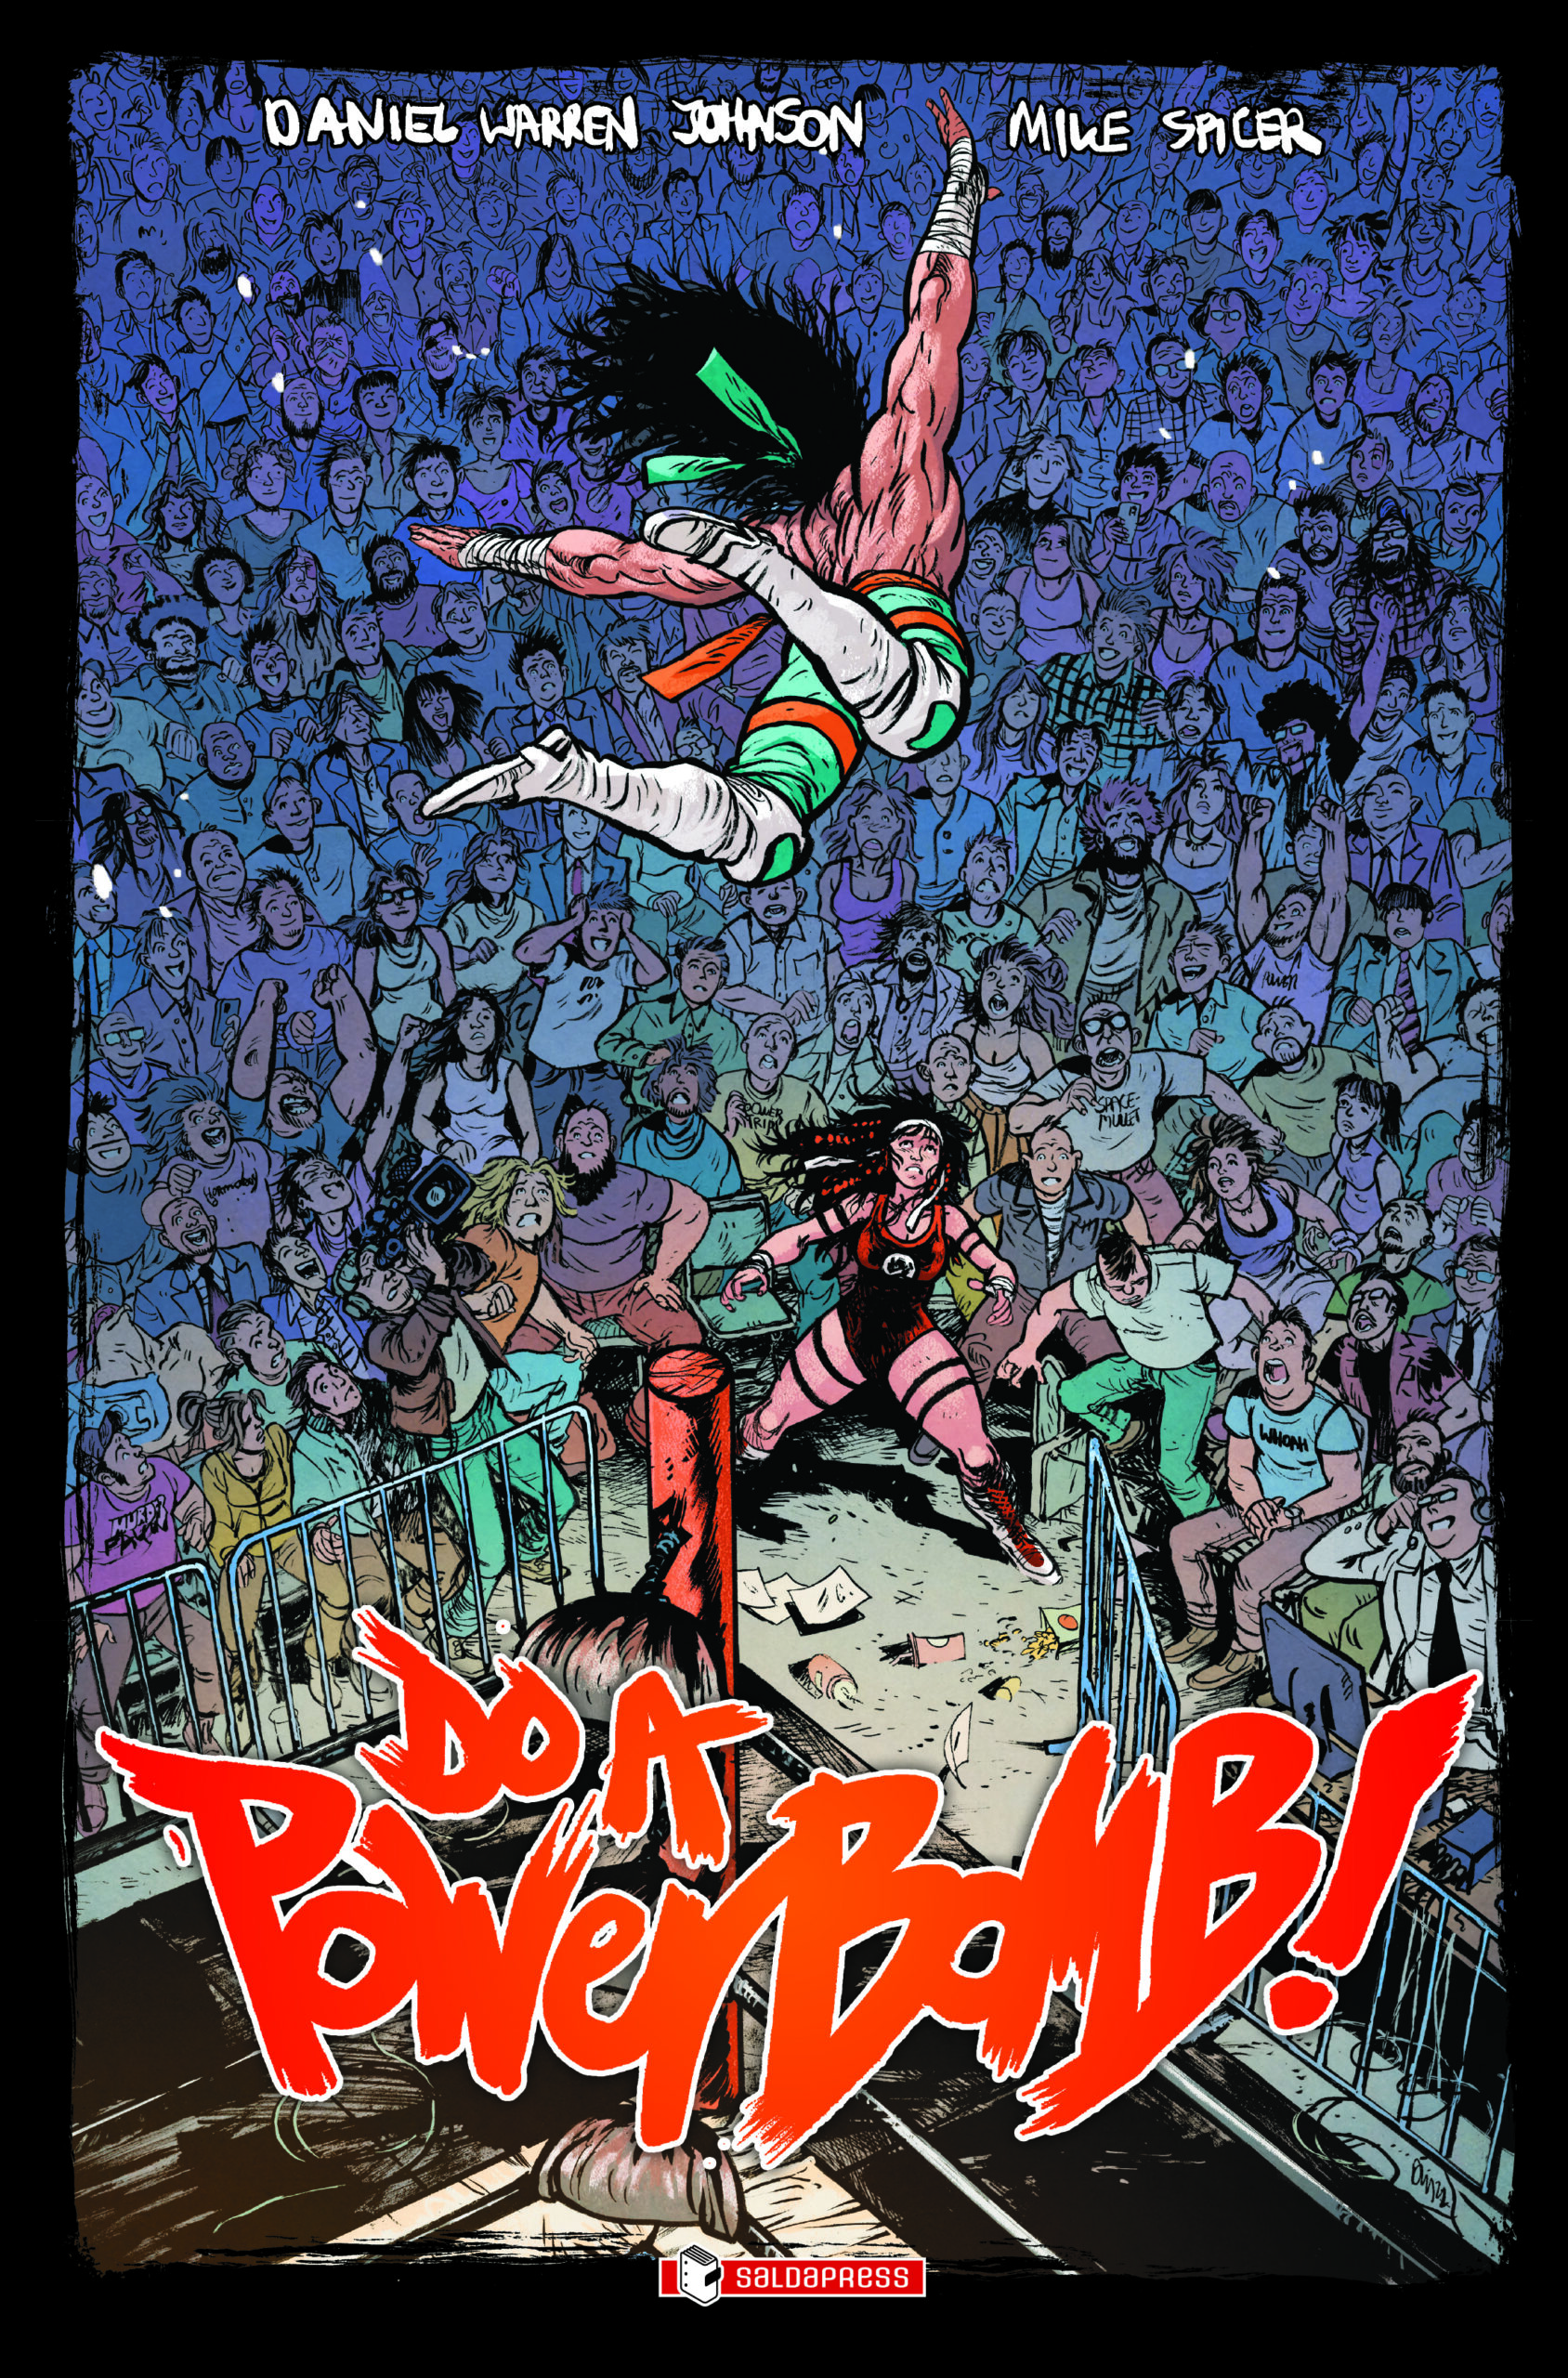 Top 10 Graphic Novel Straniere - Do A Powerbomb!